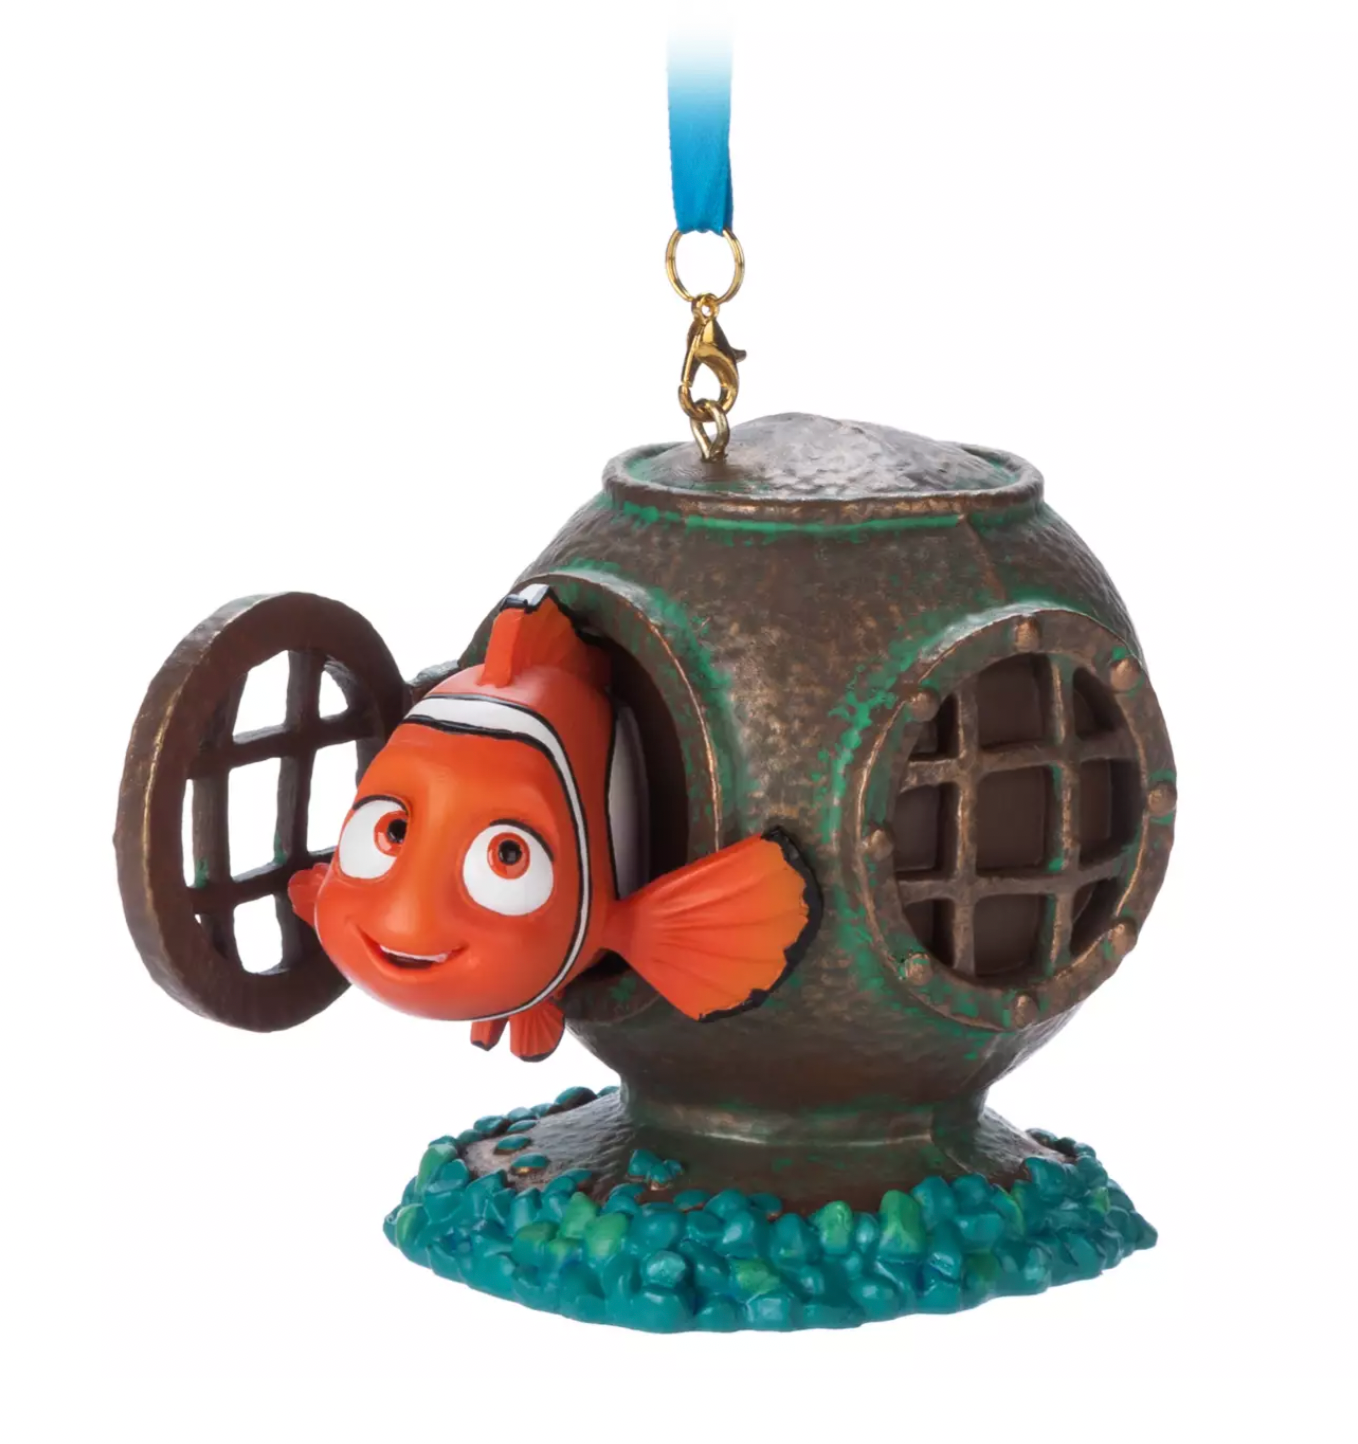 Disney Sketchbook Finding Nemo Christmas Ornament New with Tag